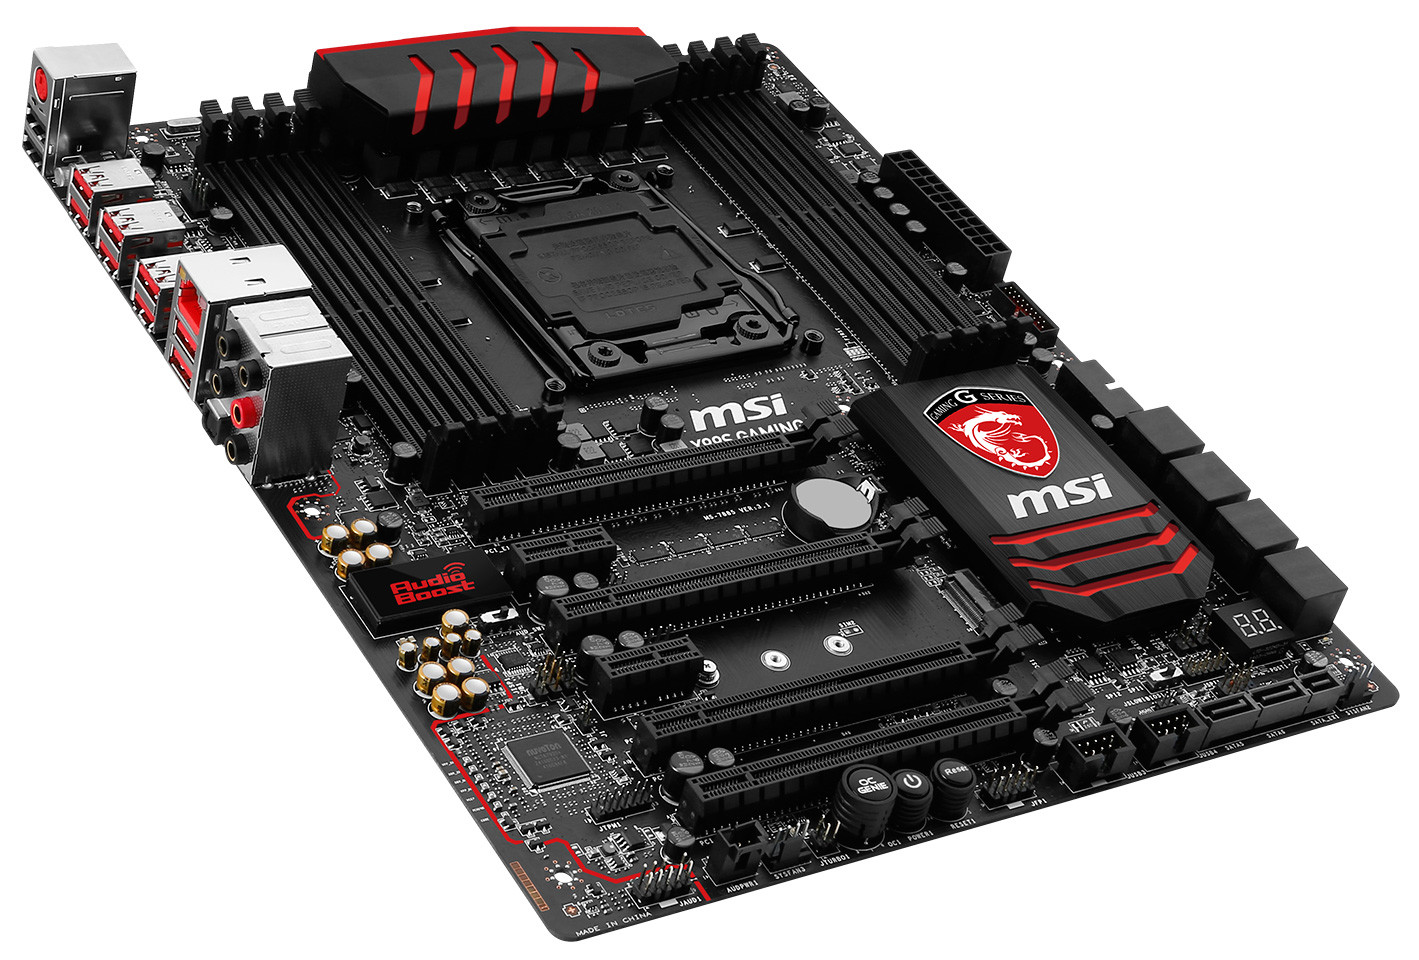 MSI Socket LGA2011v3 Motherboards Ready for "Broadwell-E" | TechPowerUp